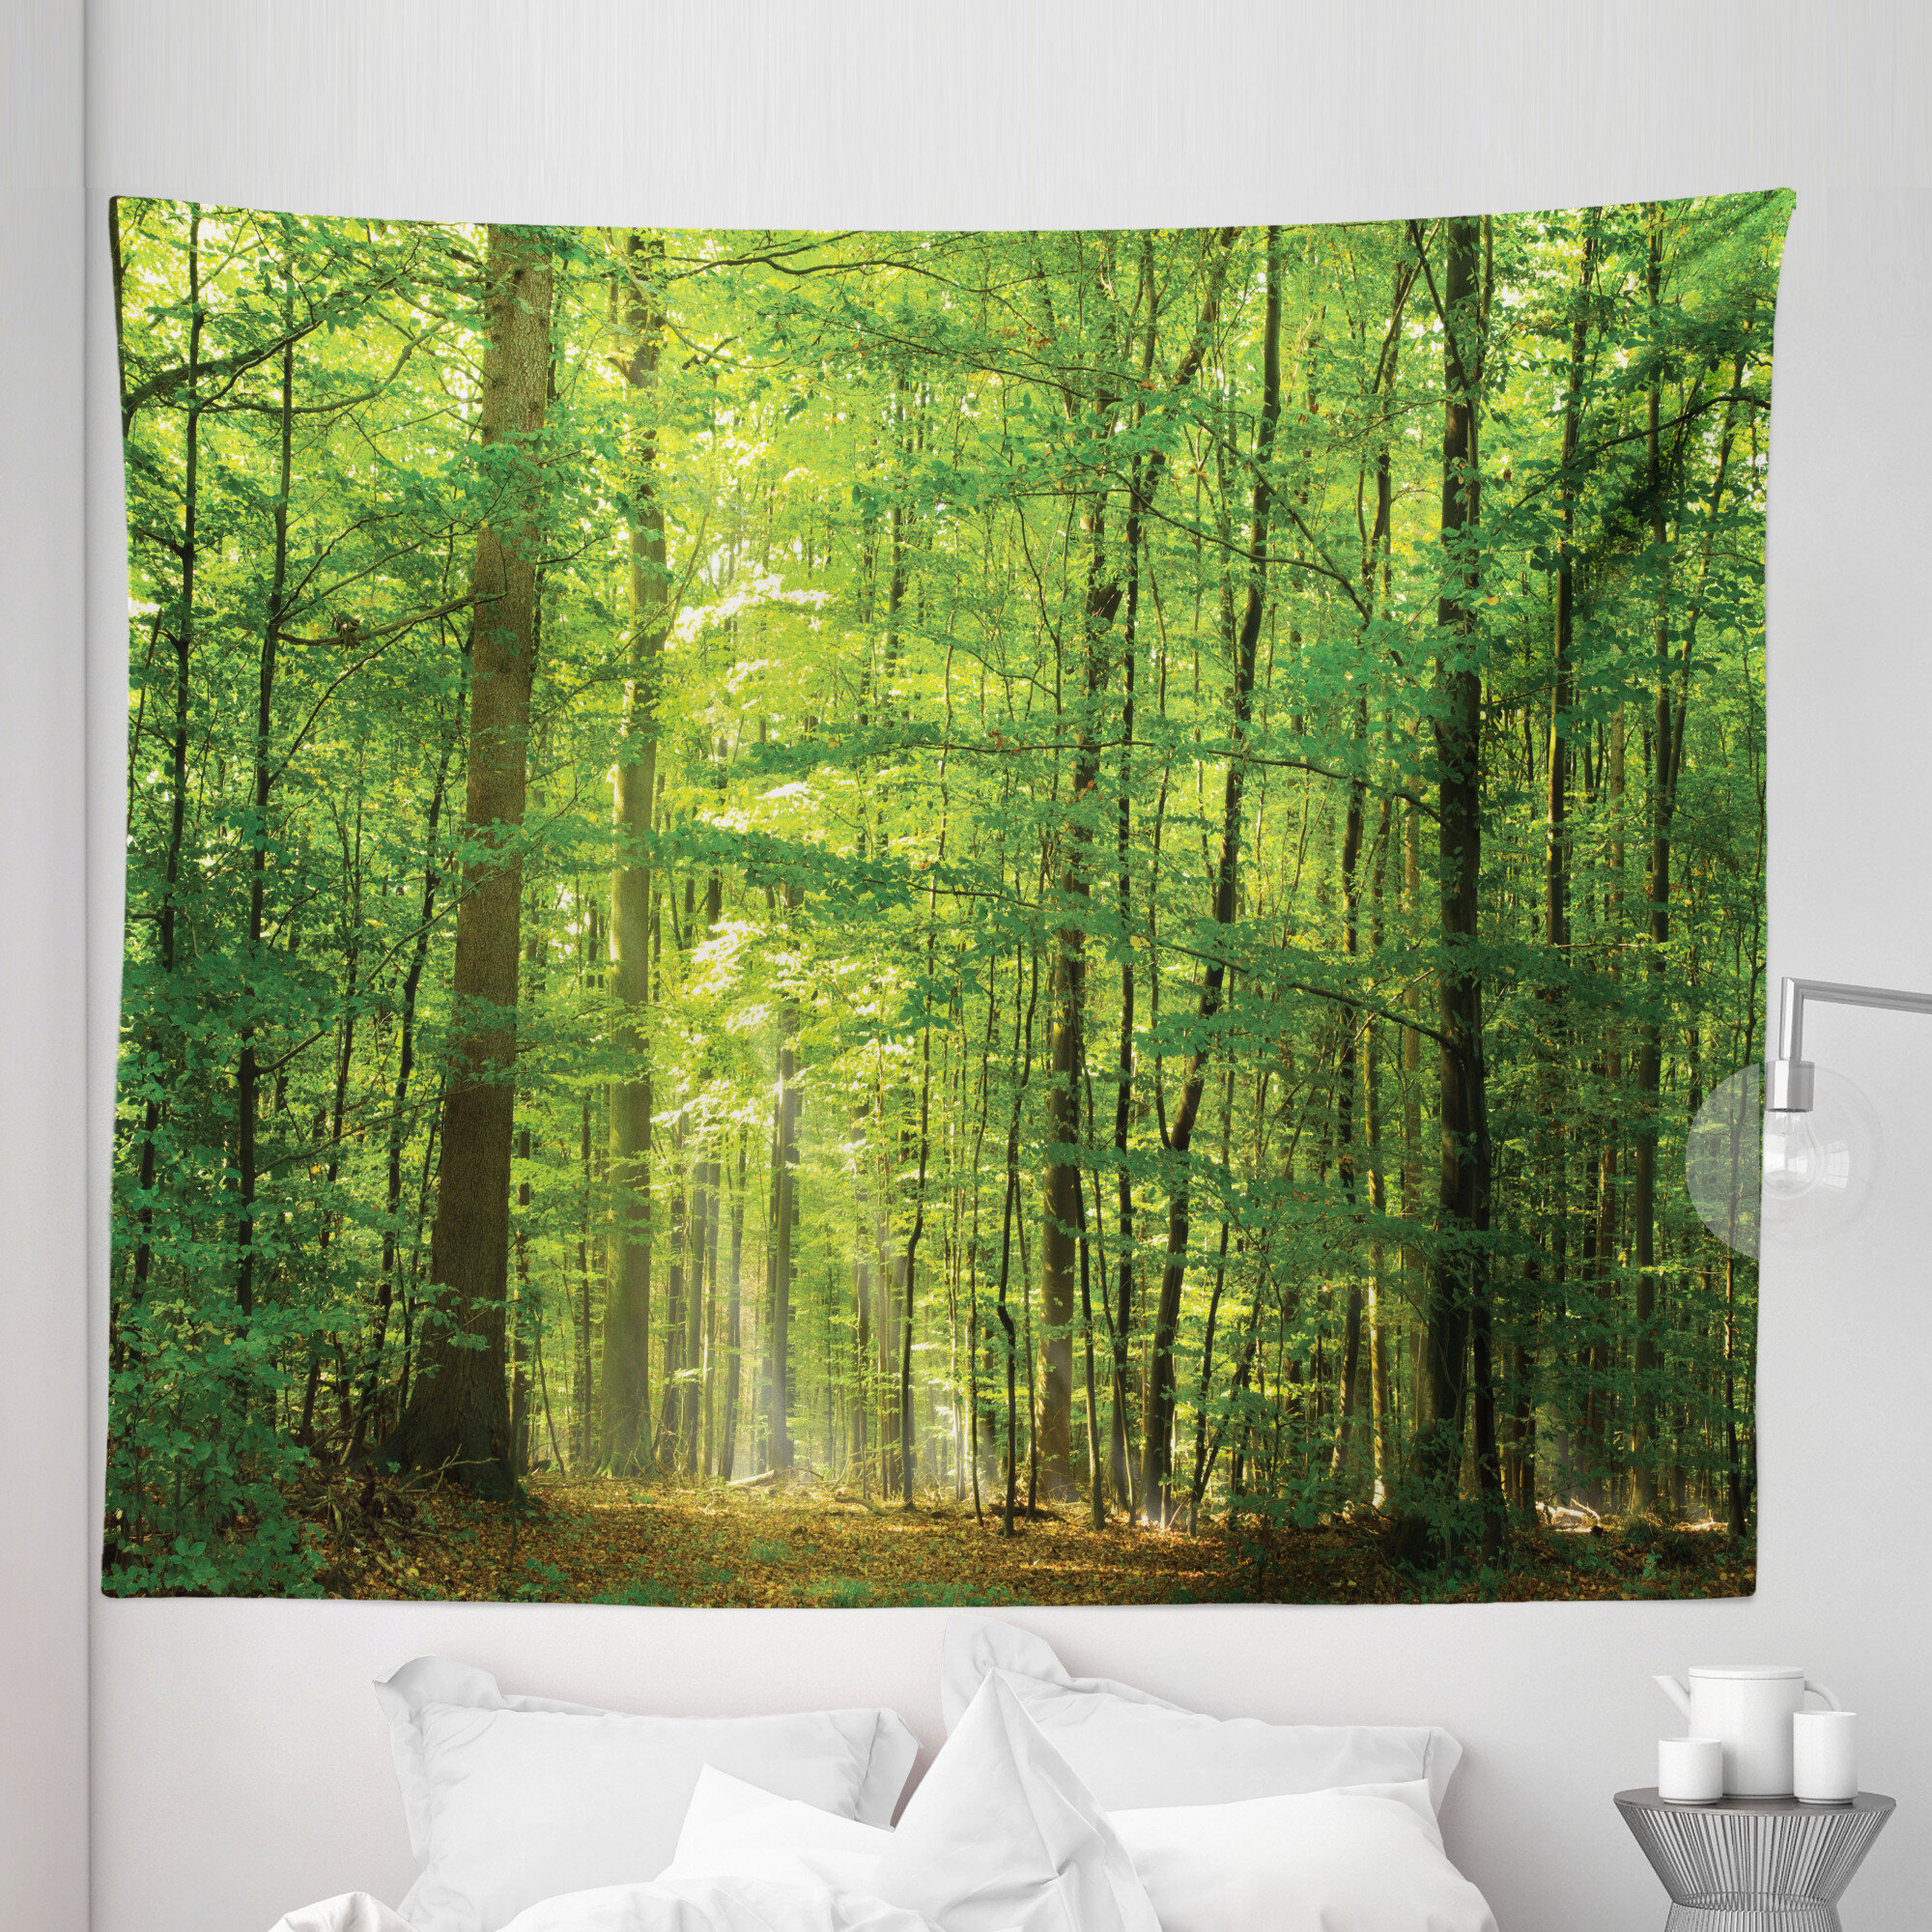 Forest Scenery Sunrise Nature Home Decor Tapestry Wall Hanging Mural Bedspread